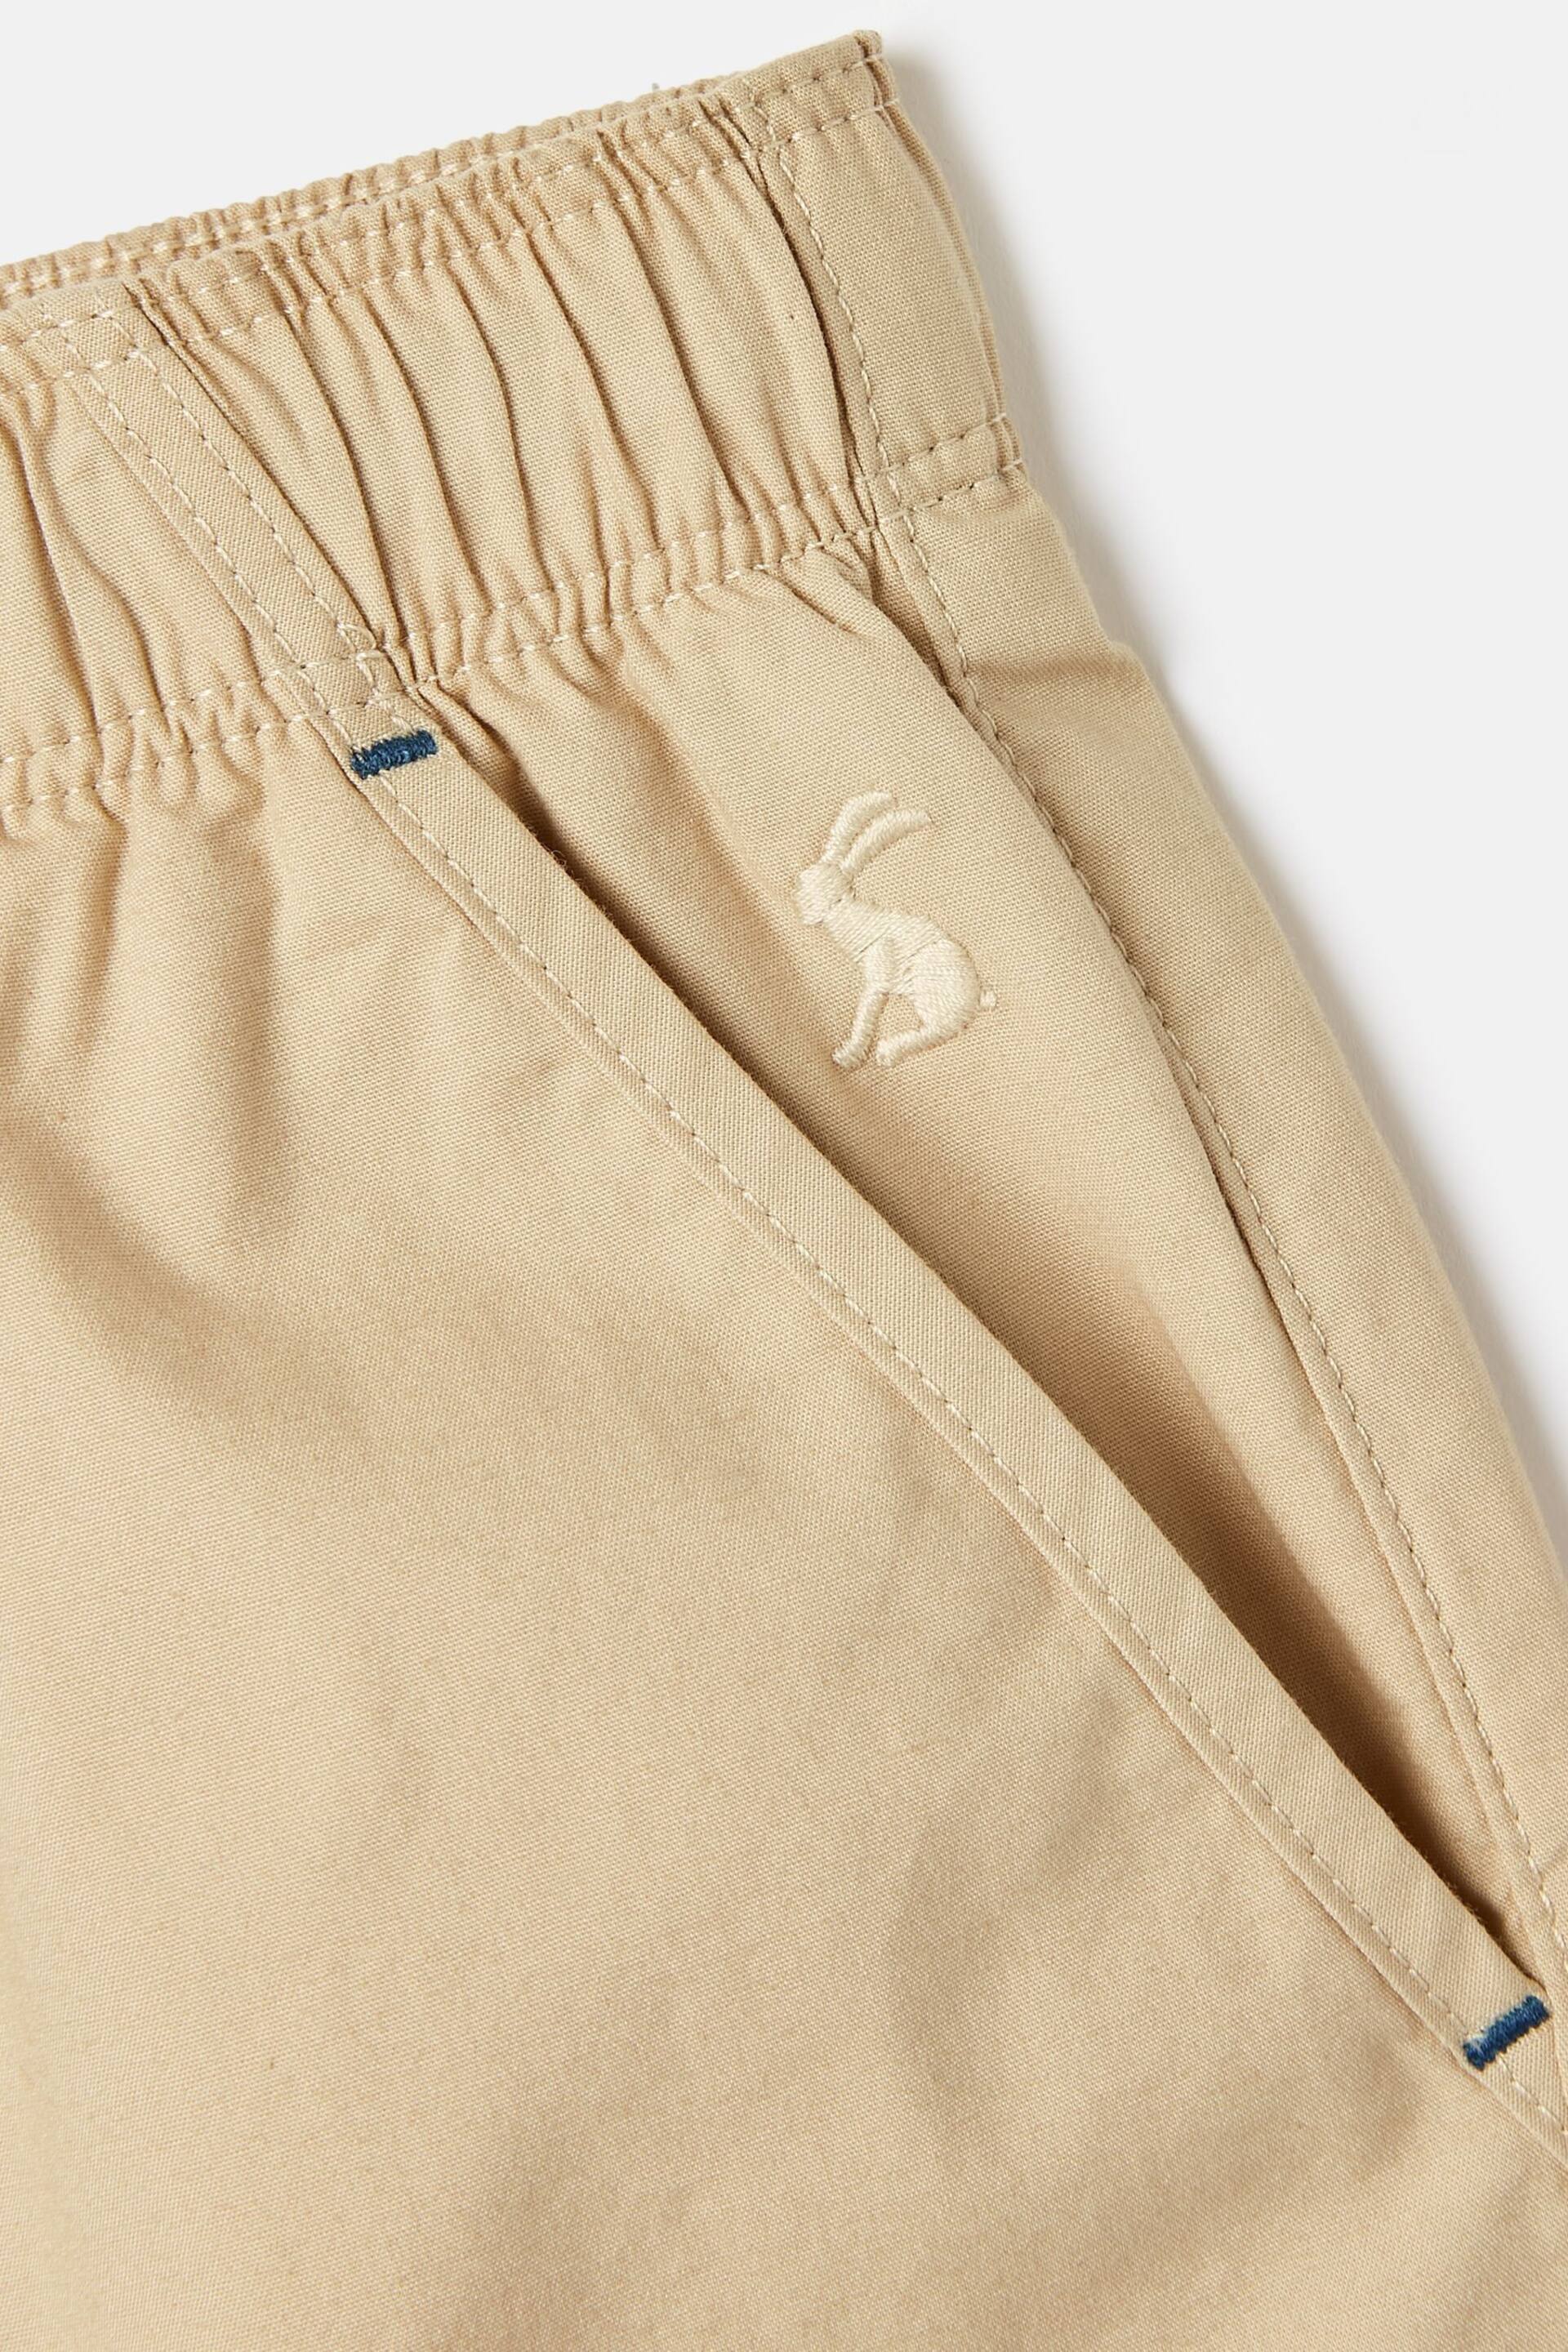 Joules Samson Stone Chino Trousers - Image 8 of 10